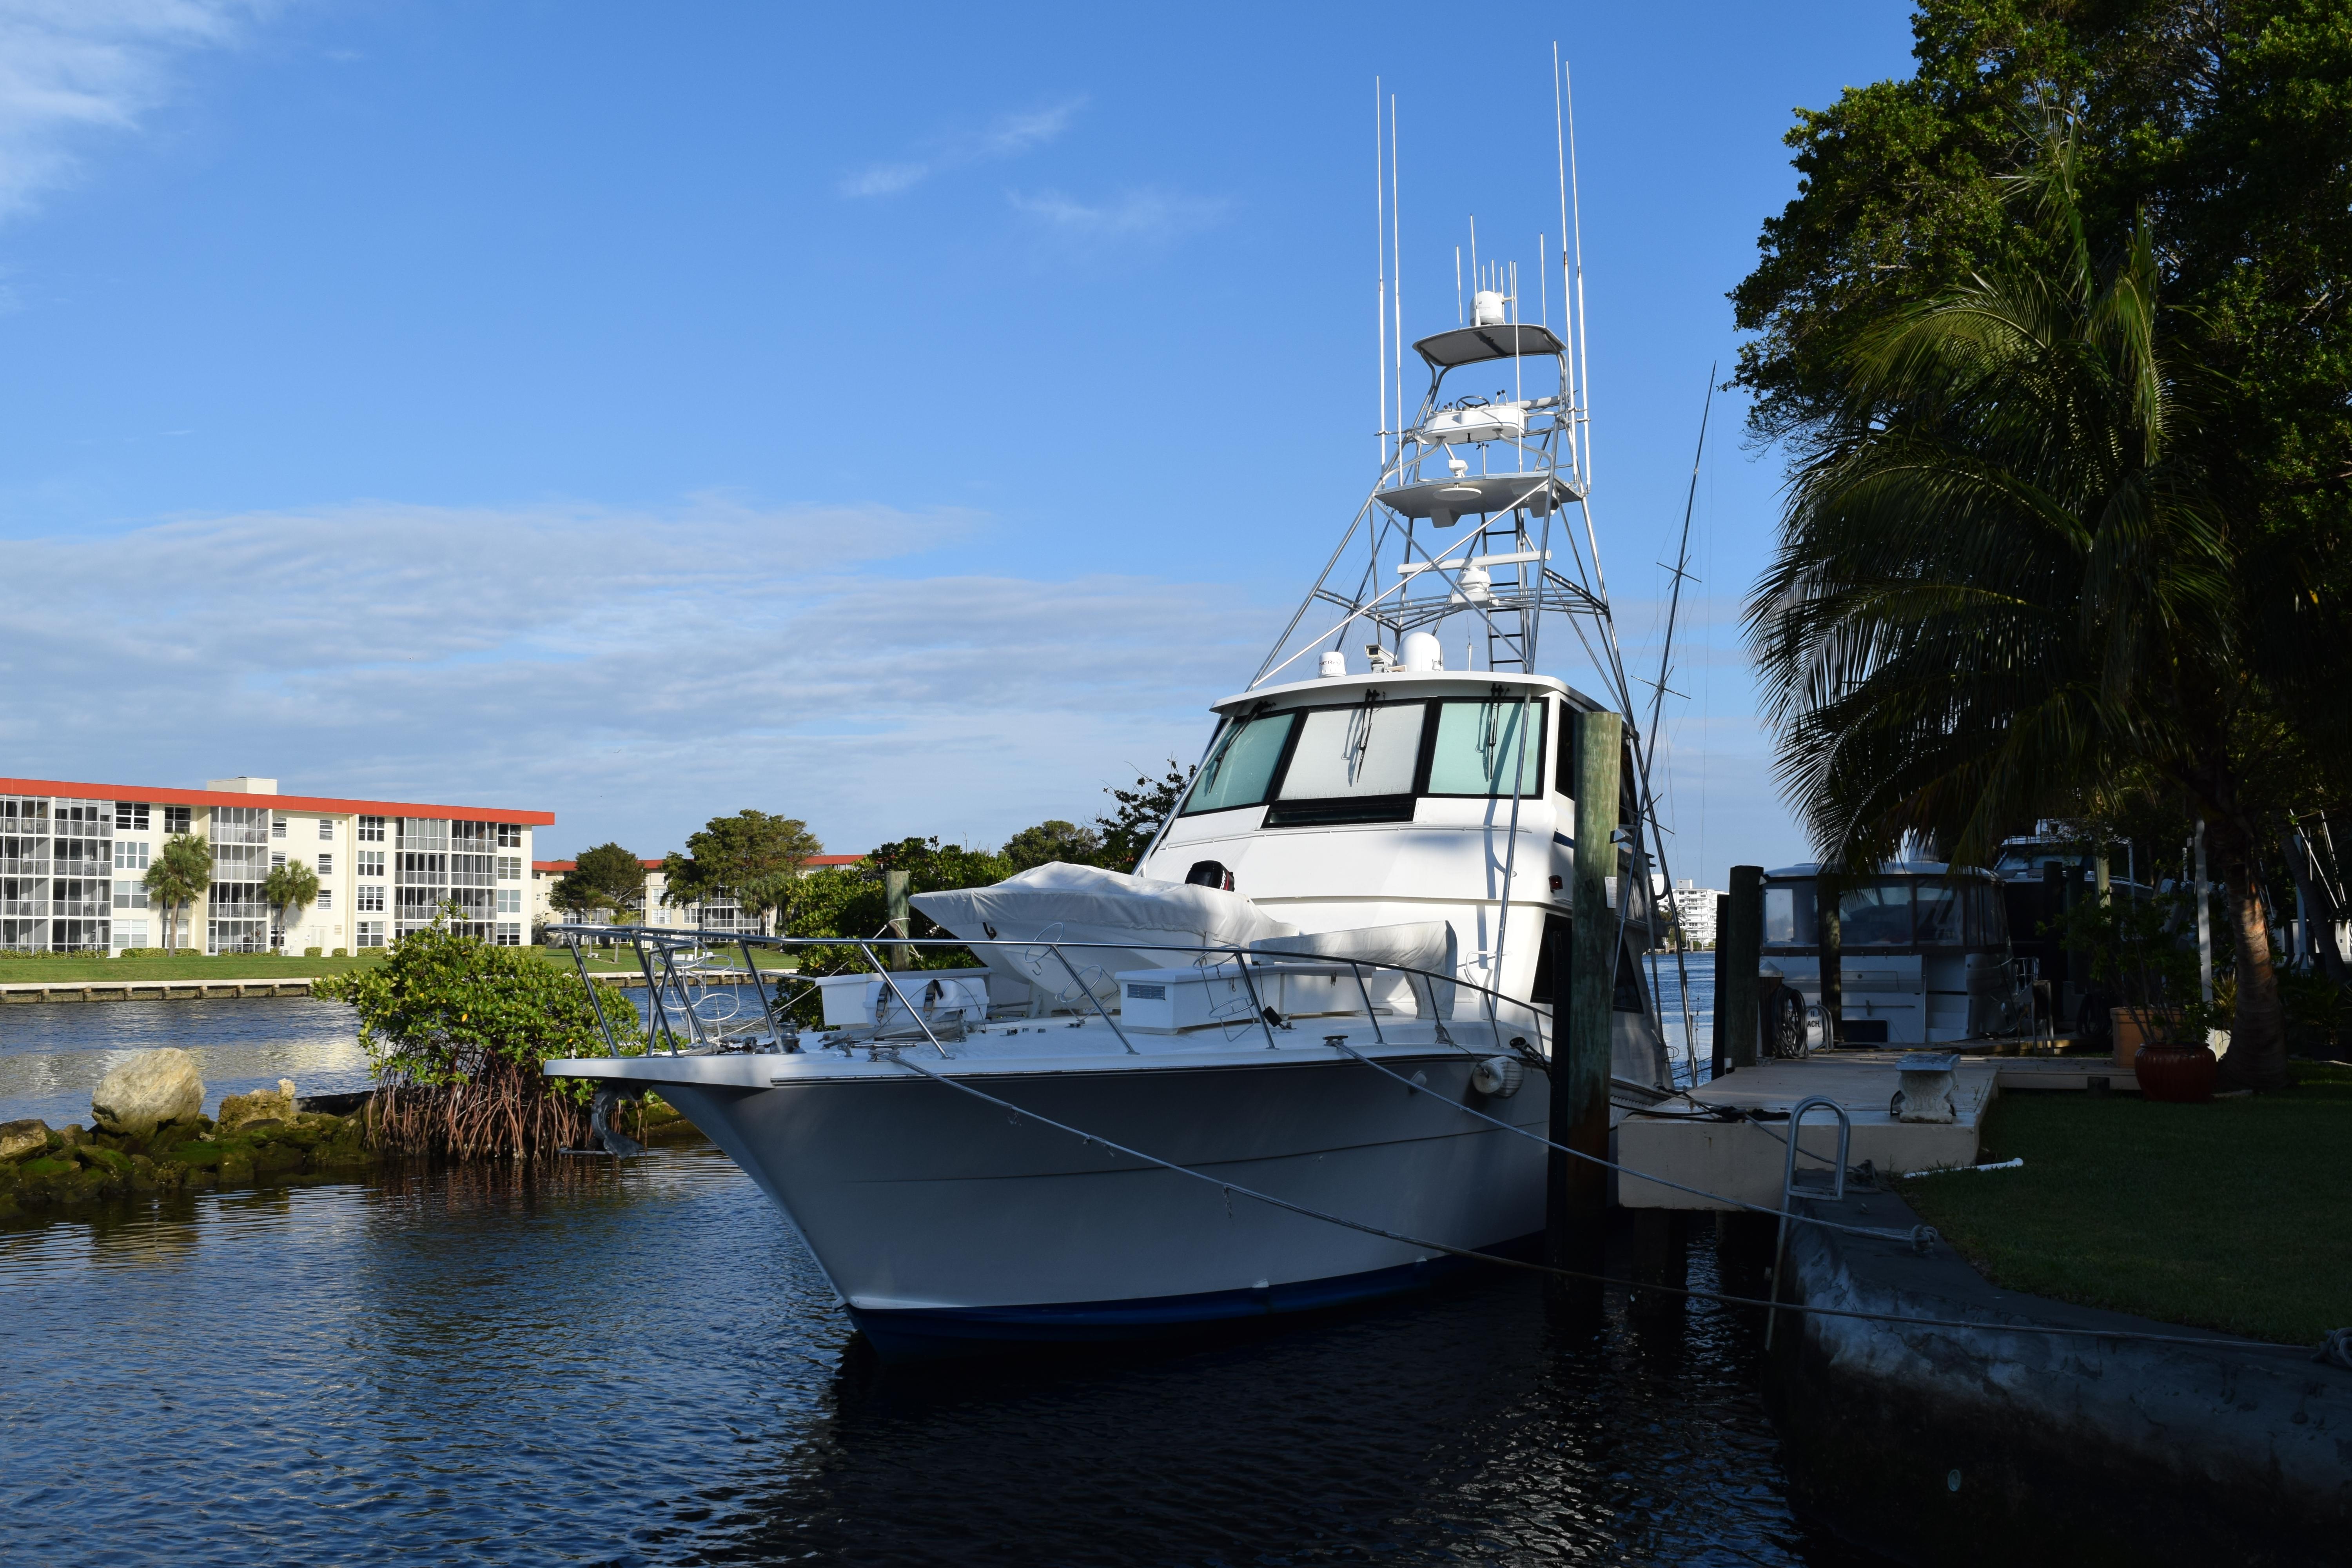 Secone Yacht for Sale, 58 Viking Yachts Fort Lauderdale, FL